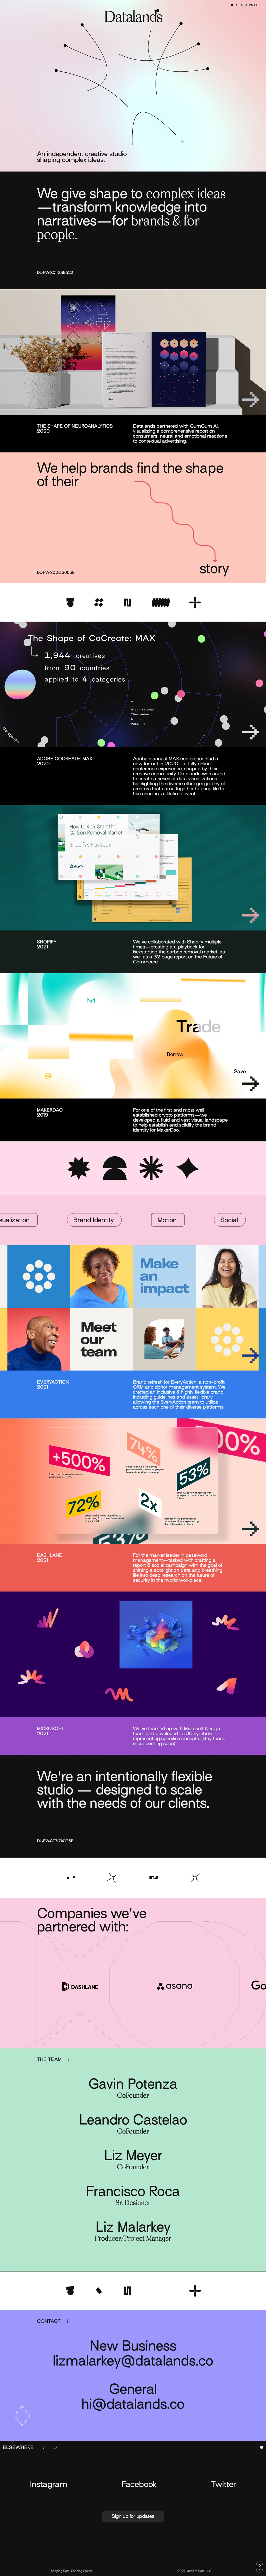 Datalands Landing Page Example: We are Datalands, an independent creative studio in NYC. Specializing in data visualization and infographics, we create clarity, pursue beauty and help brands find the shape of their story.